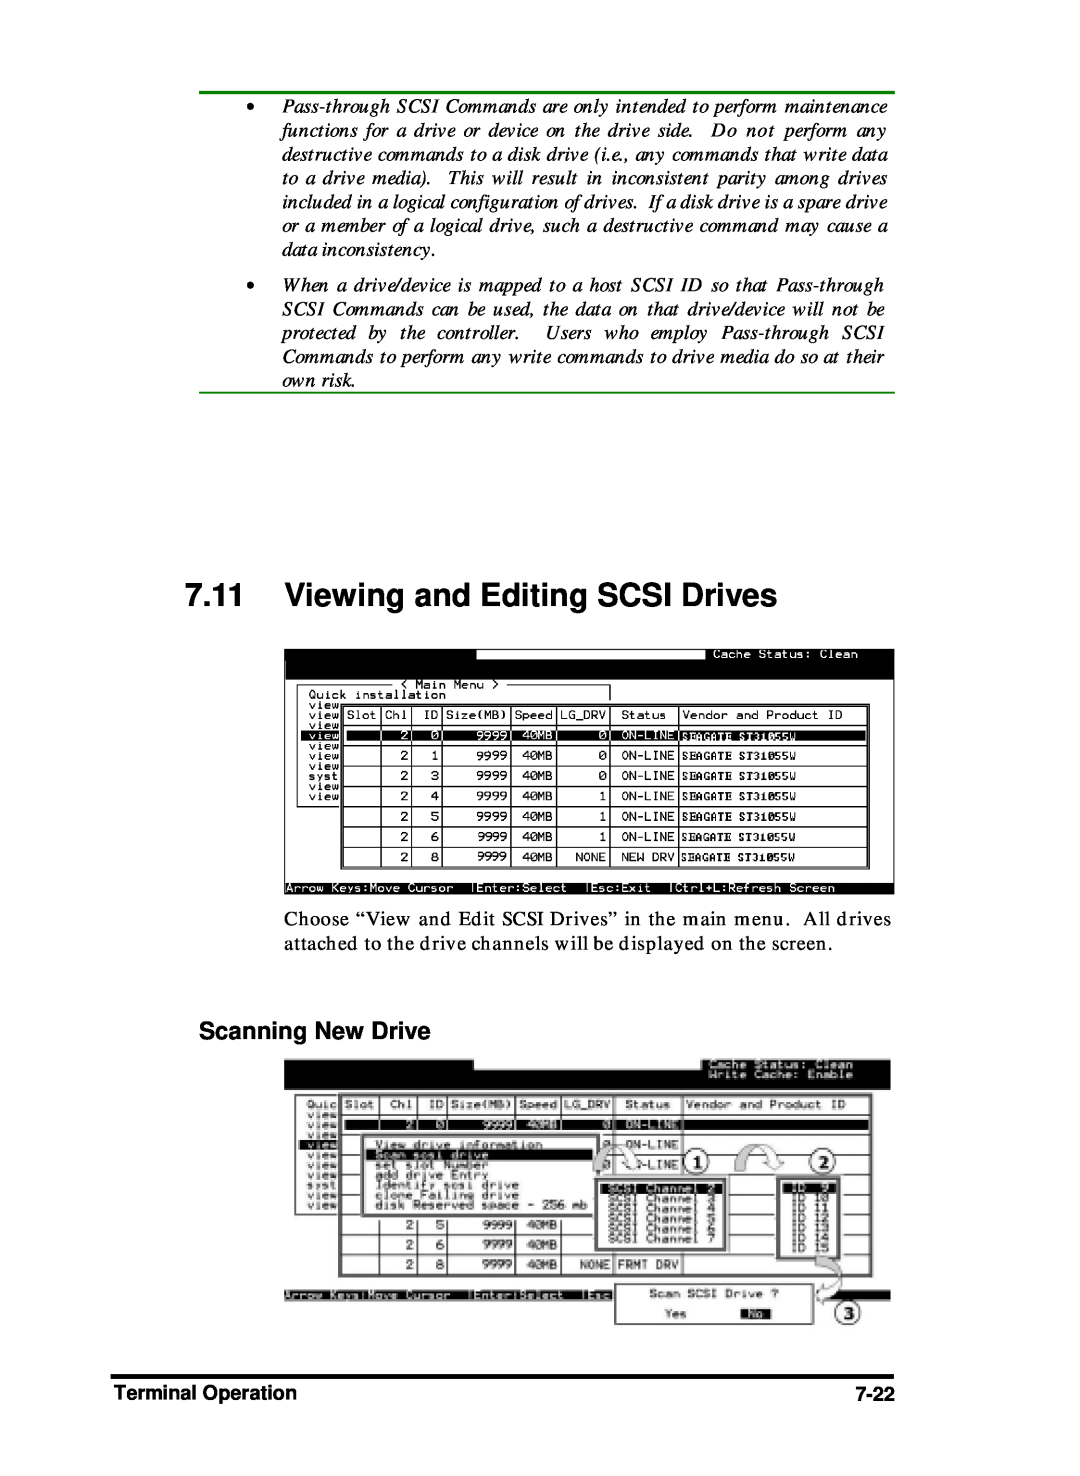 Compaq Infortrend manual Viewing and Editing SCSI Drives, Scanning New Drive 